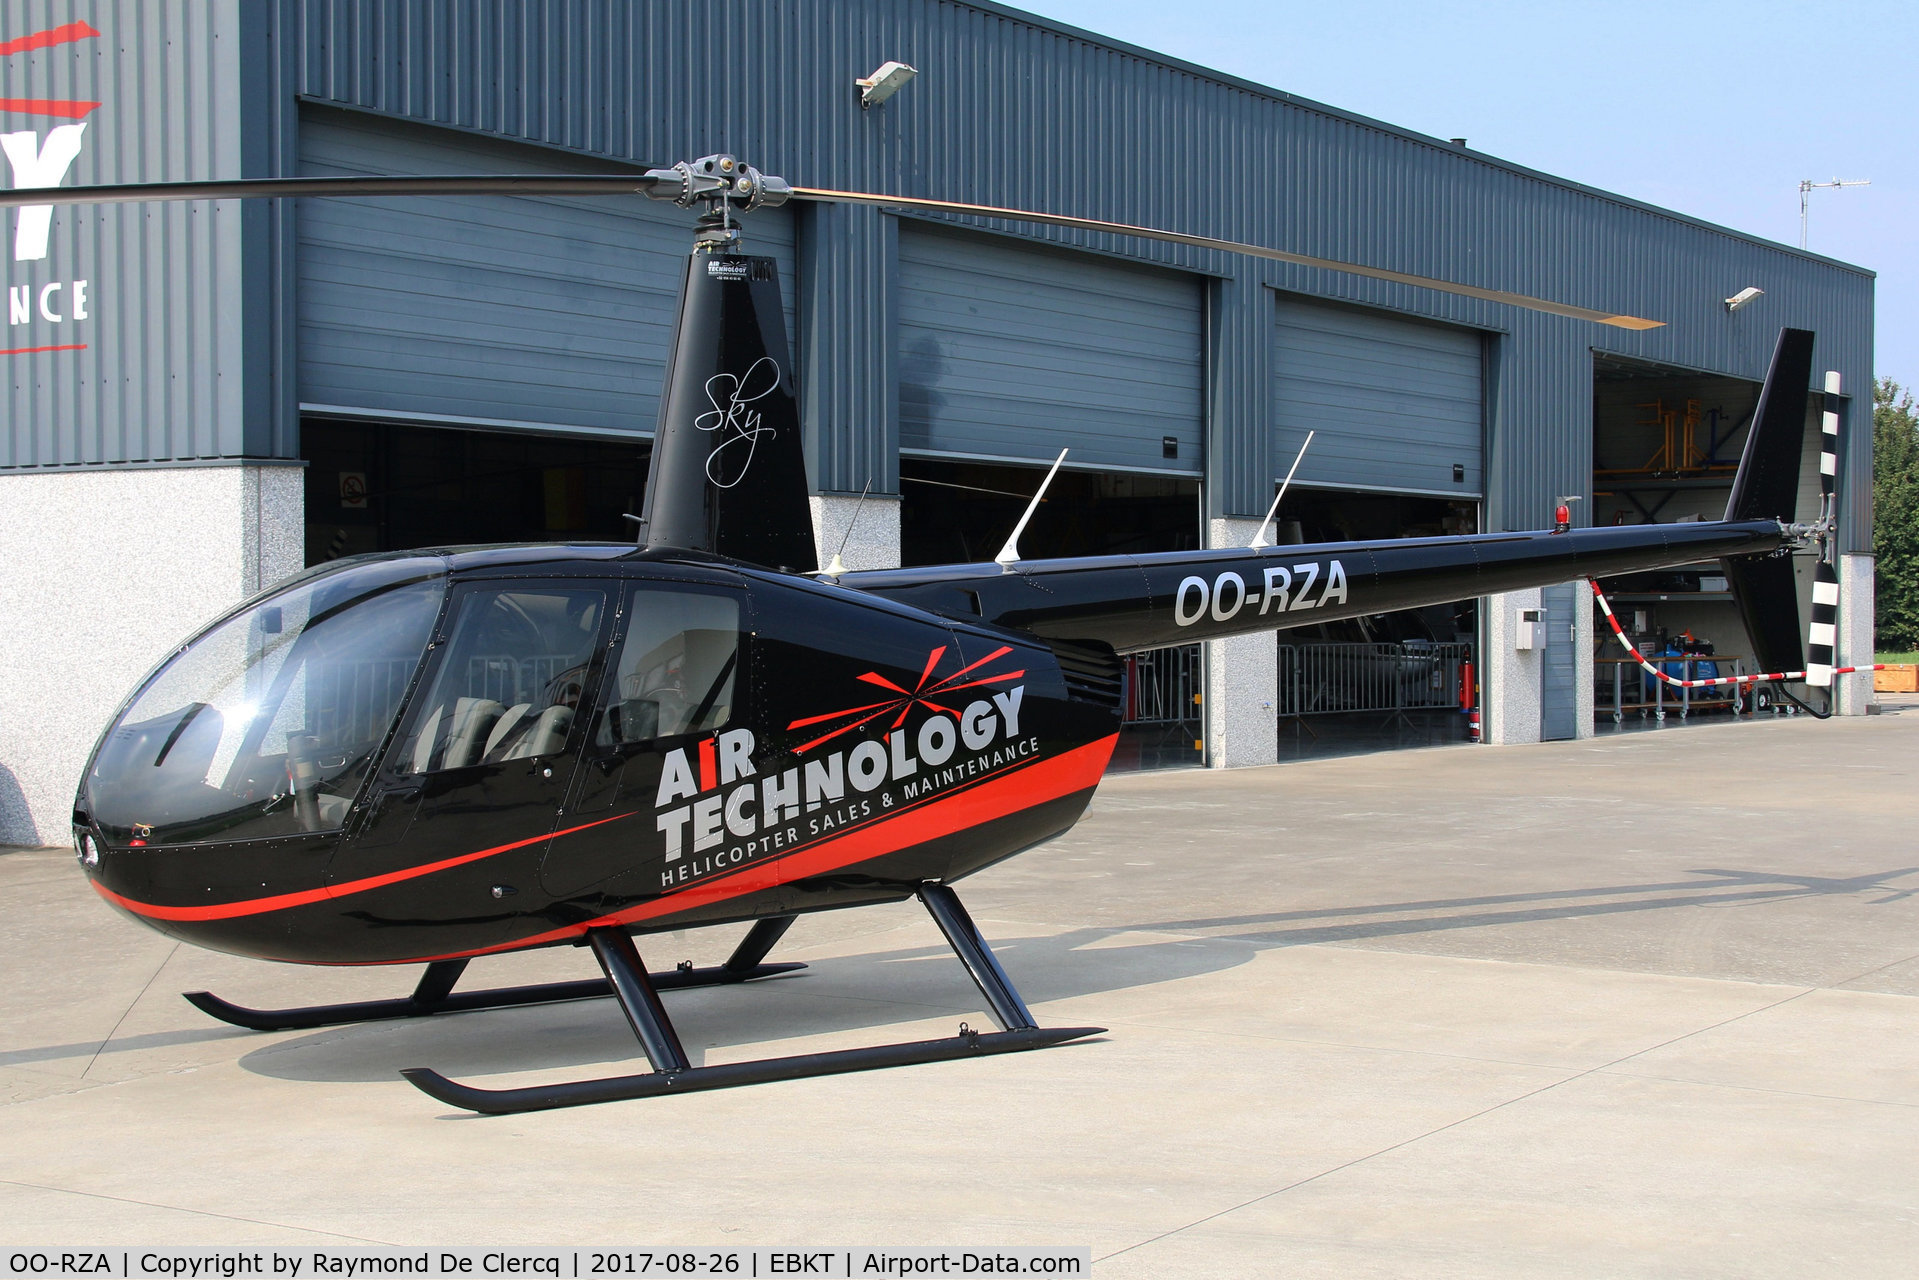 OO-RZA, 2000 Robinson R44 Raven C/N 0883, Re-registered on 2017-05-03 after restoration.